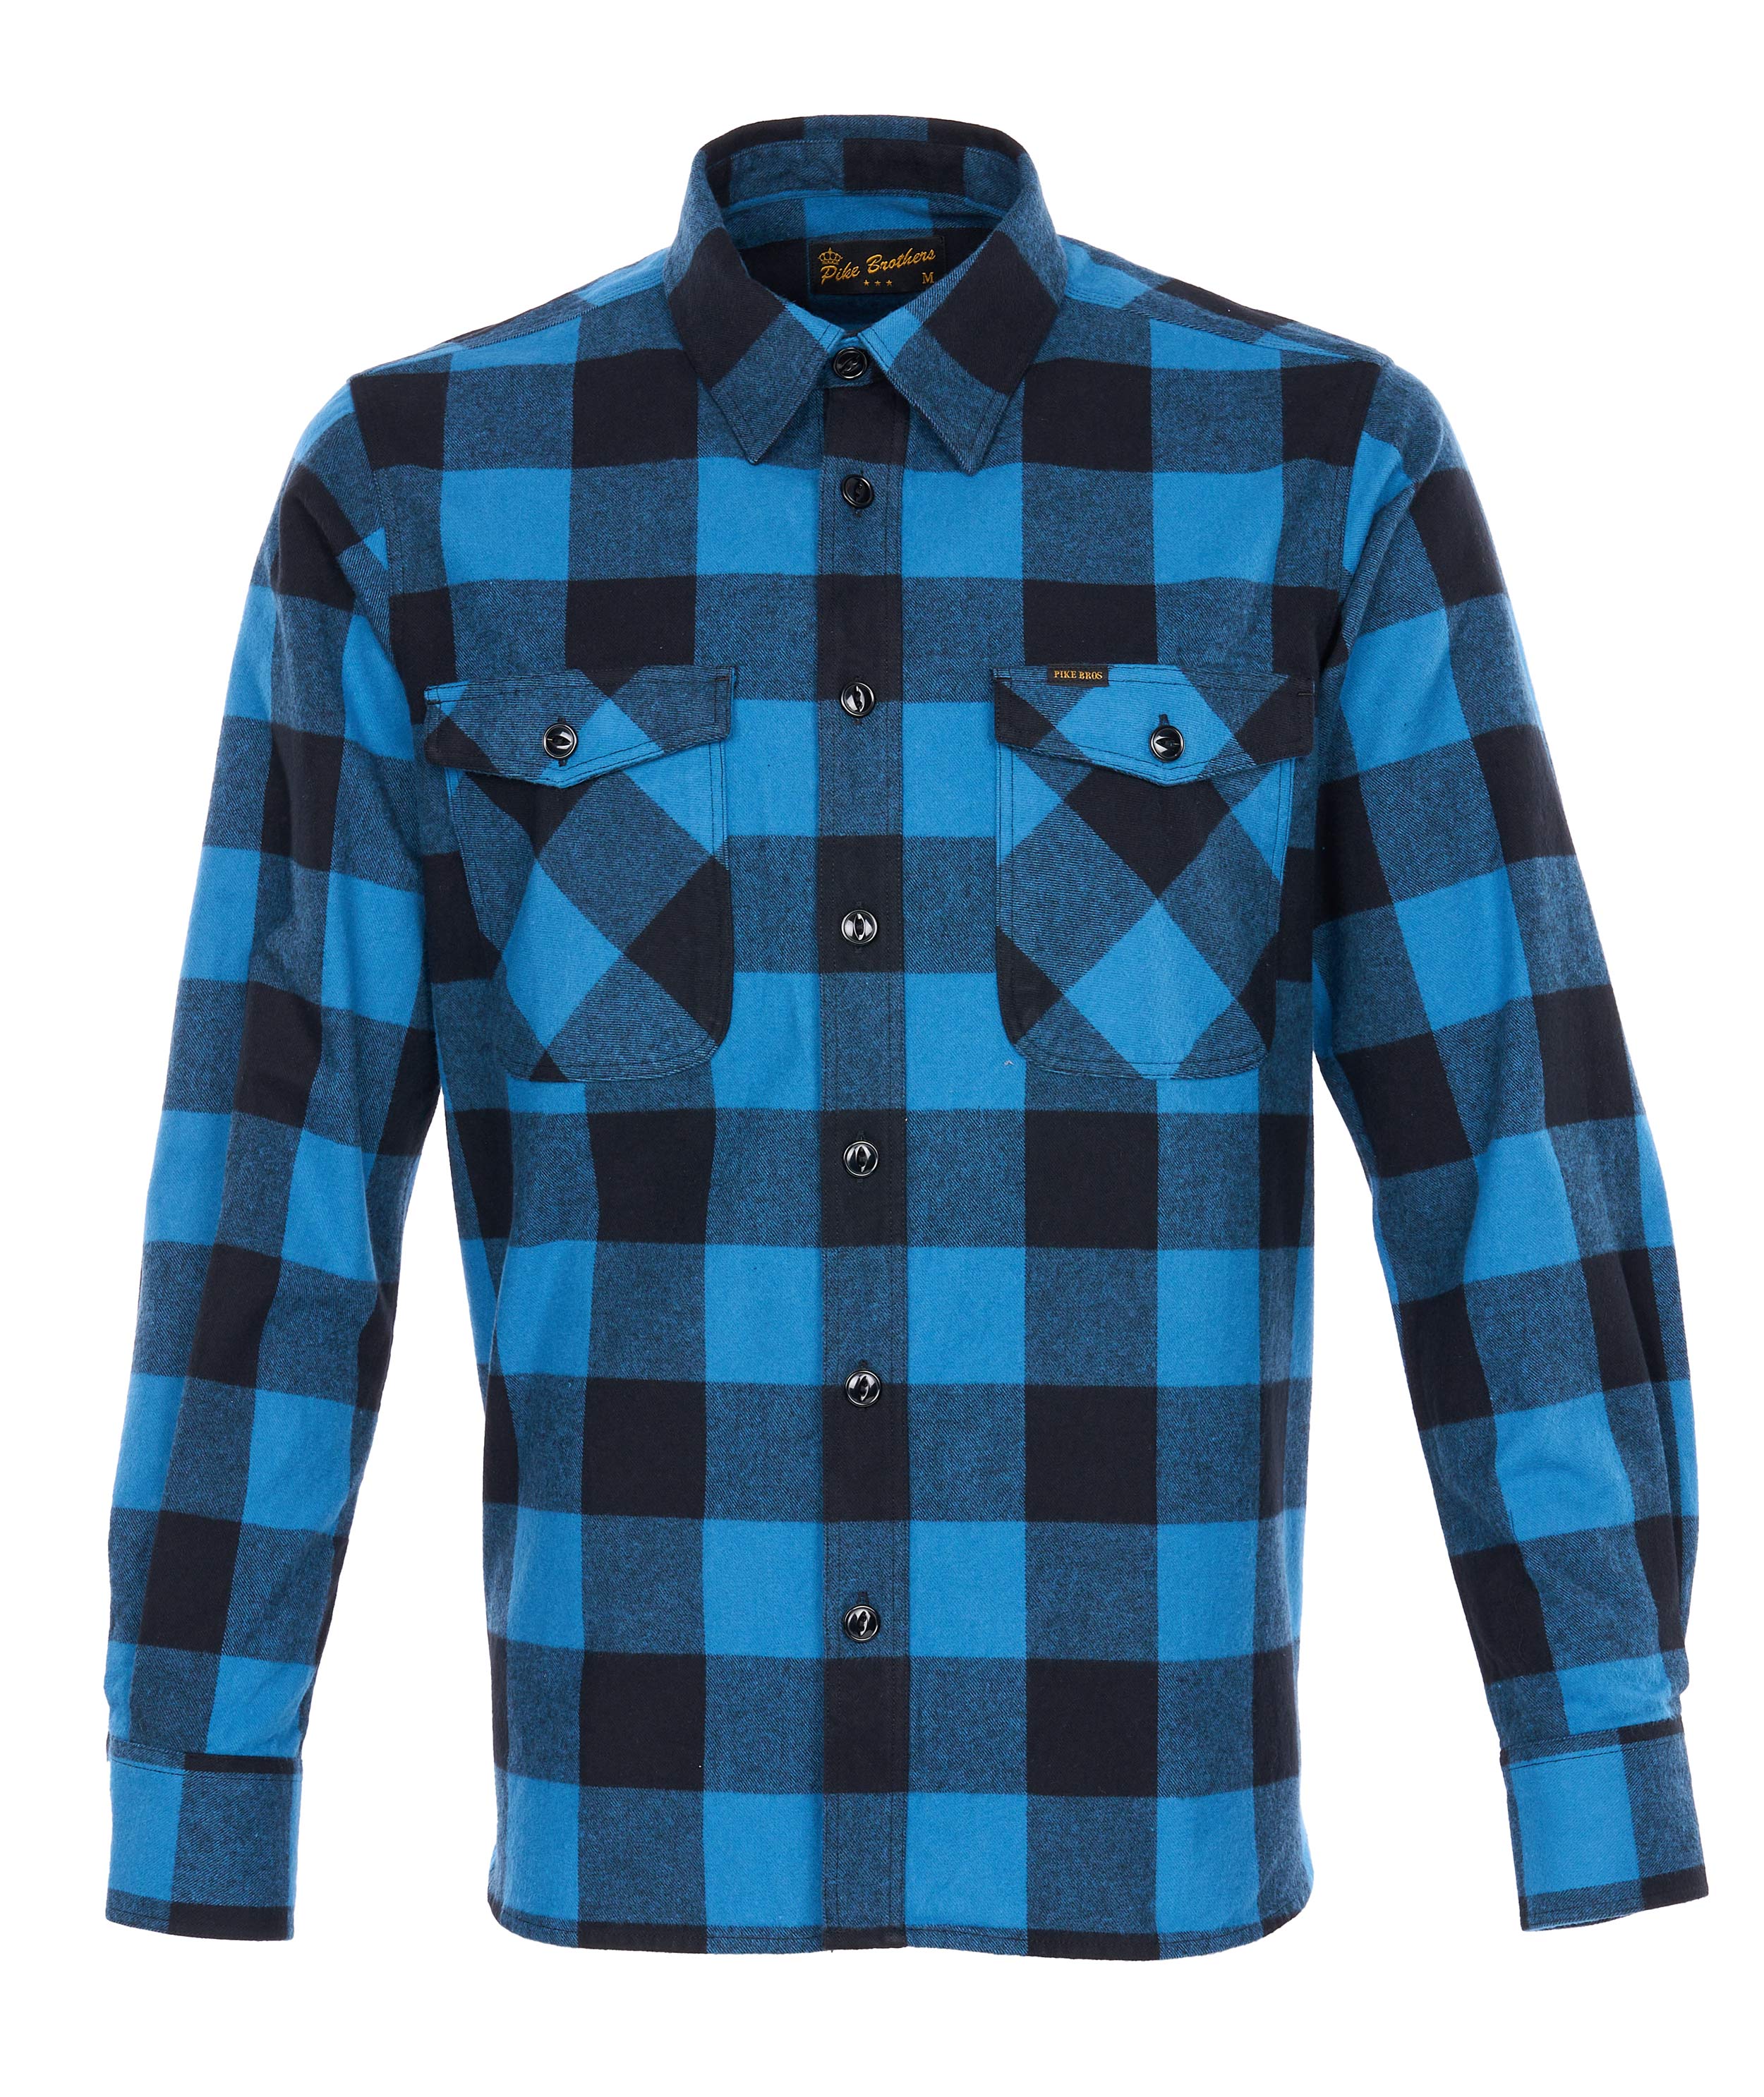 PIKE BROTHERS 1943 CPO SHIRT BUFFALO BLUE FLANNEL